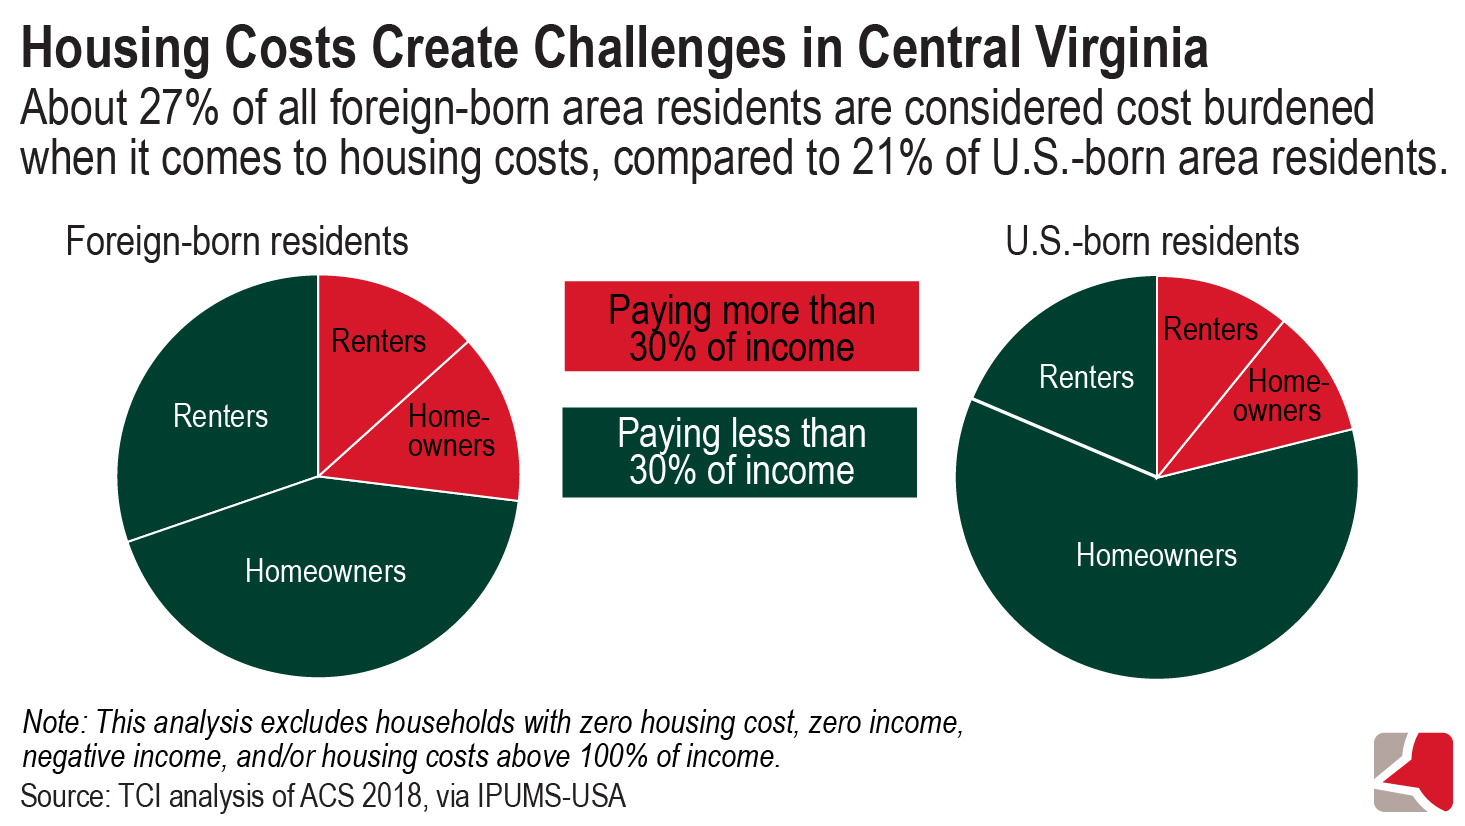 Two circle graphs showing average share of income paid toward housing for foreign-born and U.S. born residents in central Virginia.  About 27% of all foreign-born area residents are considered cost-burdened when it comes to housing, compared to 21% of U.S. born residents based on analysis of ACS 2018 data via IPUMS-USA